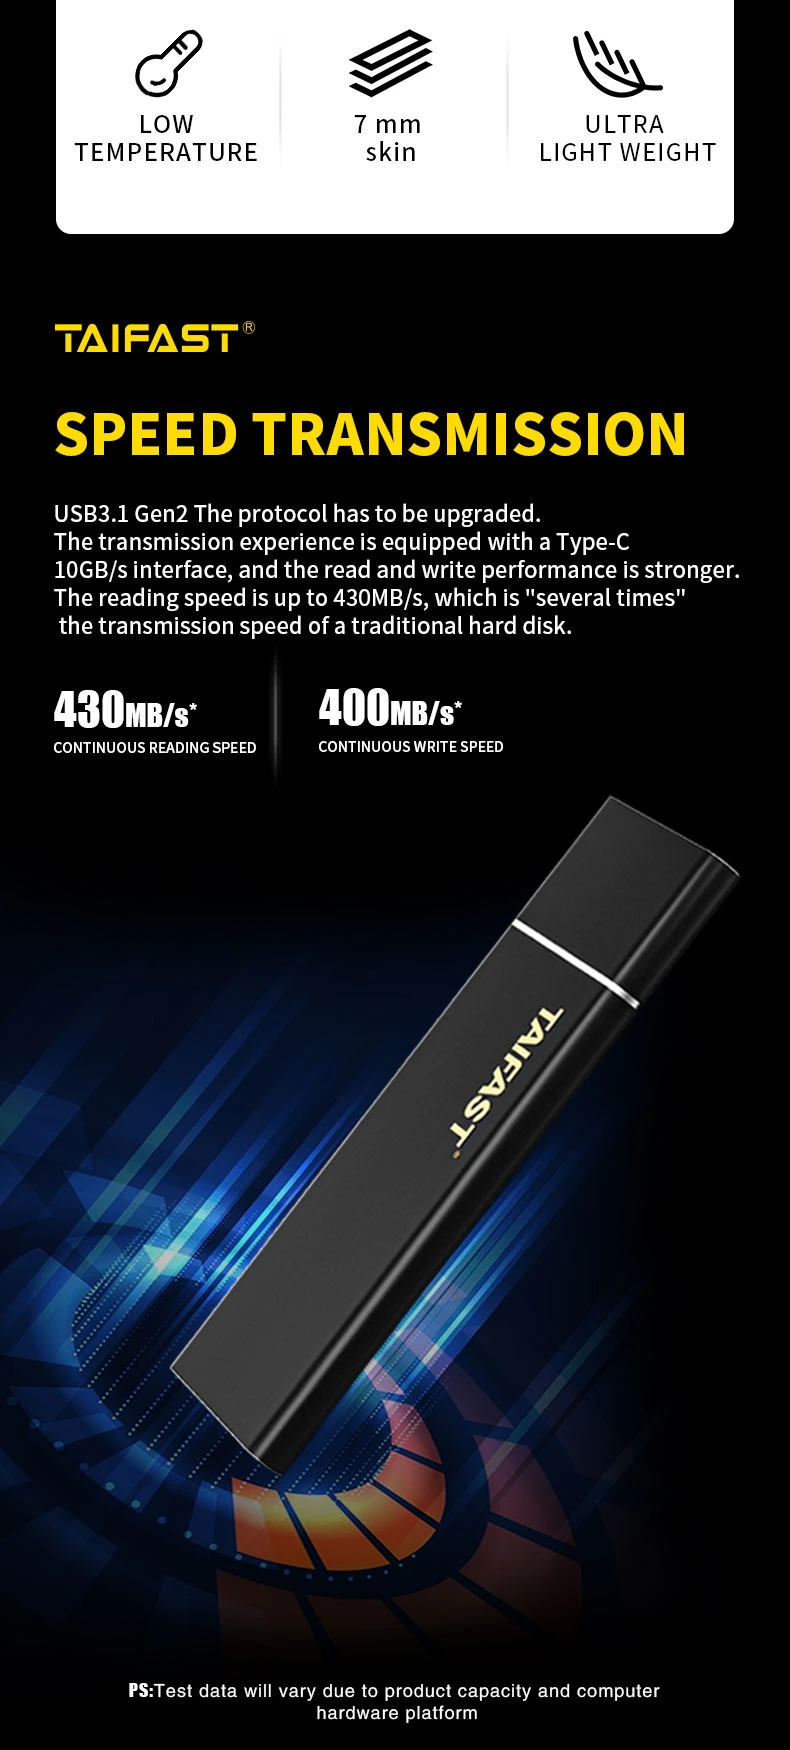 Taifast Hotsale Portable SSD 120GB 240GB 480GB M. 2 Ngff Solid State Drive for PC Laptop 5%off